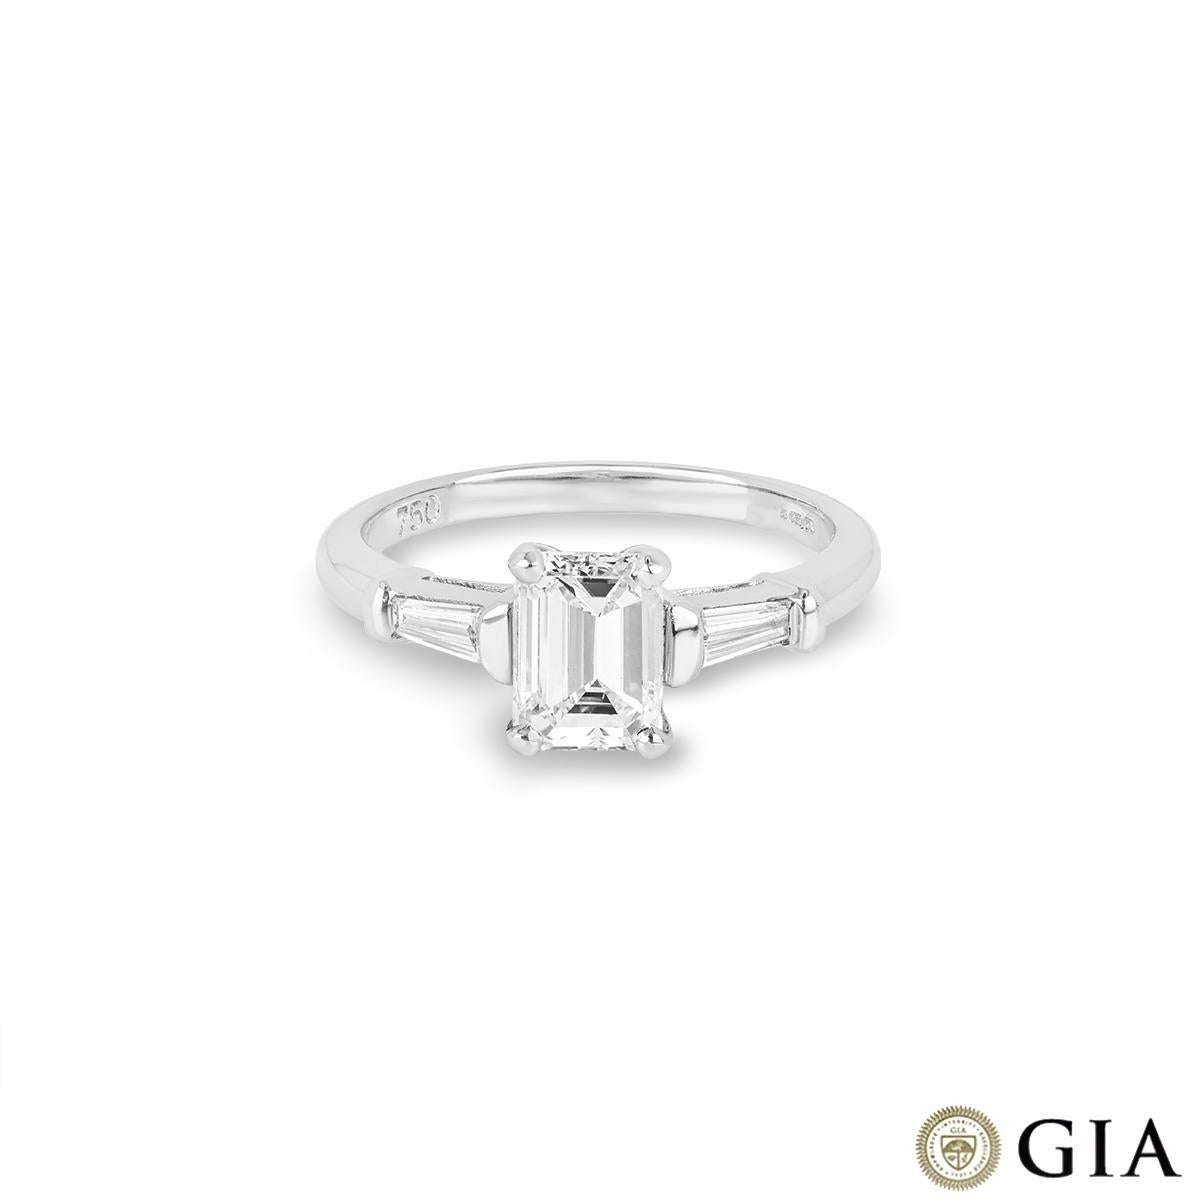 GIA Certified White Gold Emerald Cut Diamond Ring 1.00ct F/VS1 In New Condition For Sale In London, GB